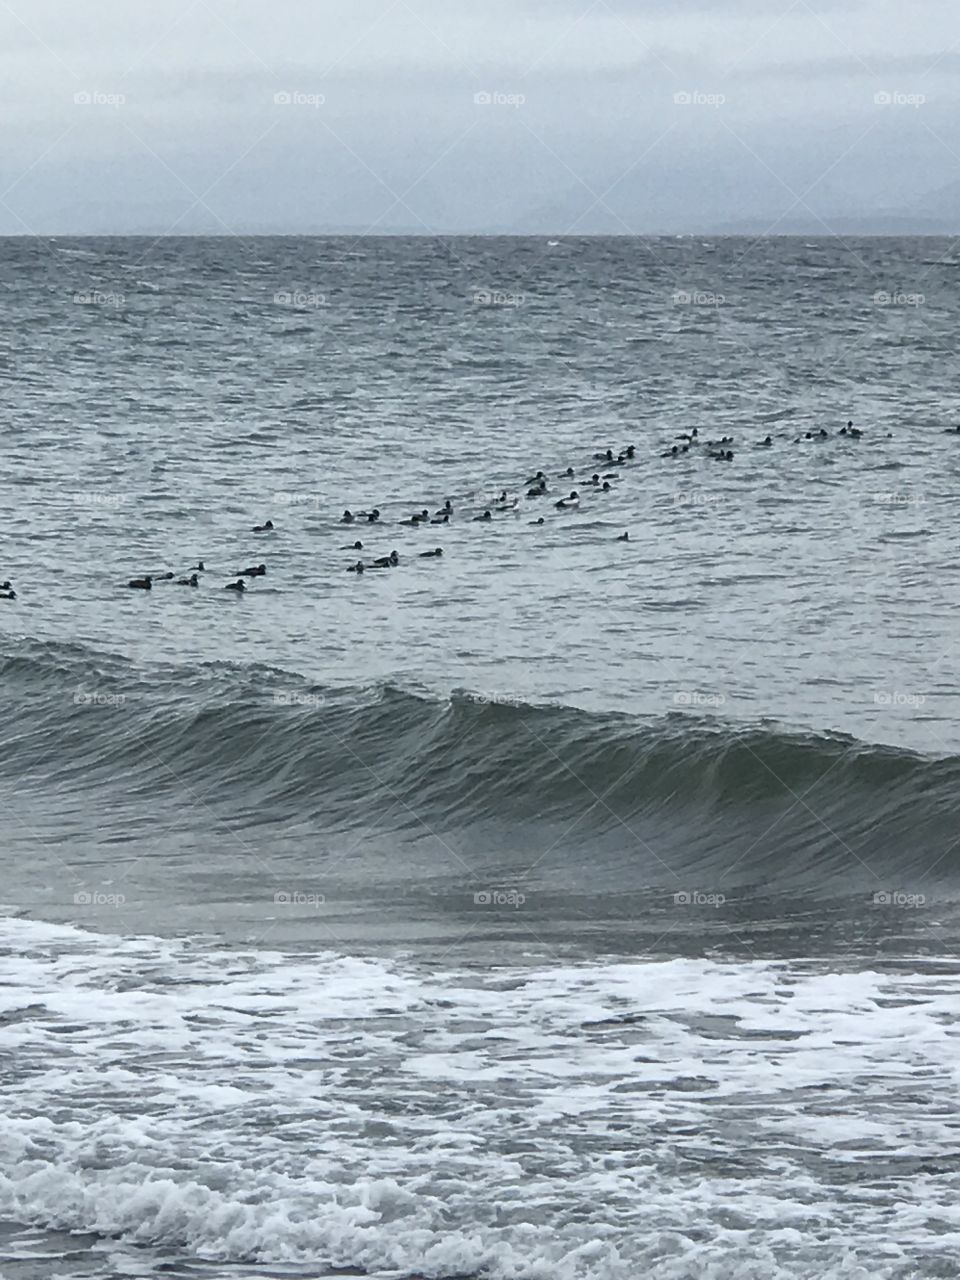 Shorebirds floating on the churning seas on a grey winter day. The blackbirds standout on the grey waters, with white foamy surf in the foreground and a blue cloudy skyline in the background. 